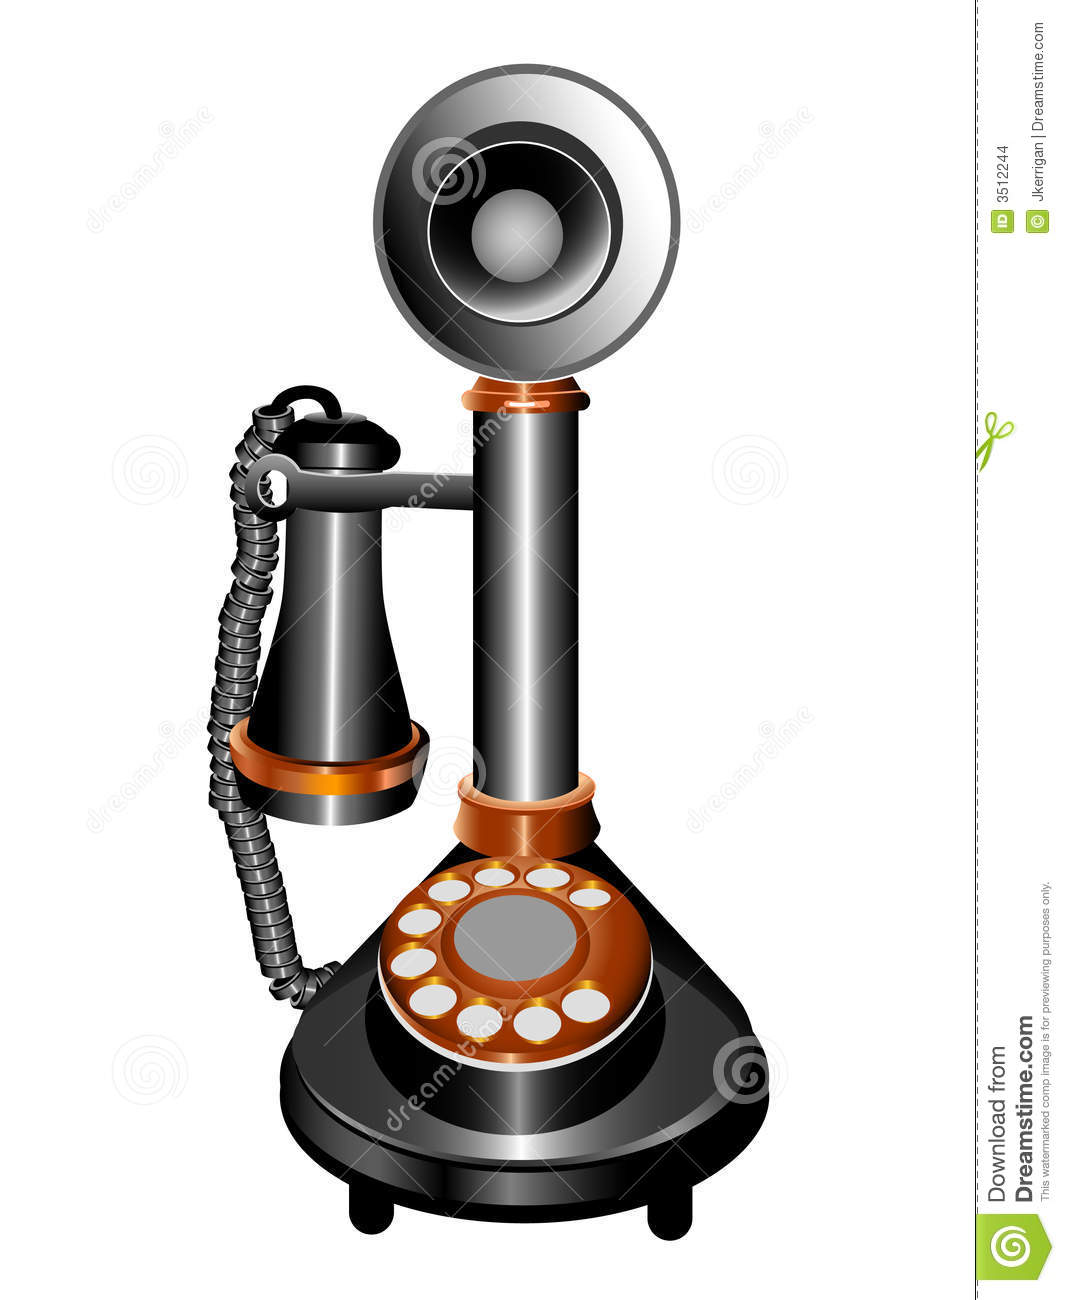 Antique Phone Stock Images   Image  3512244